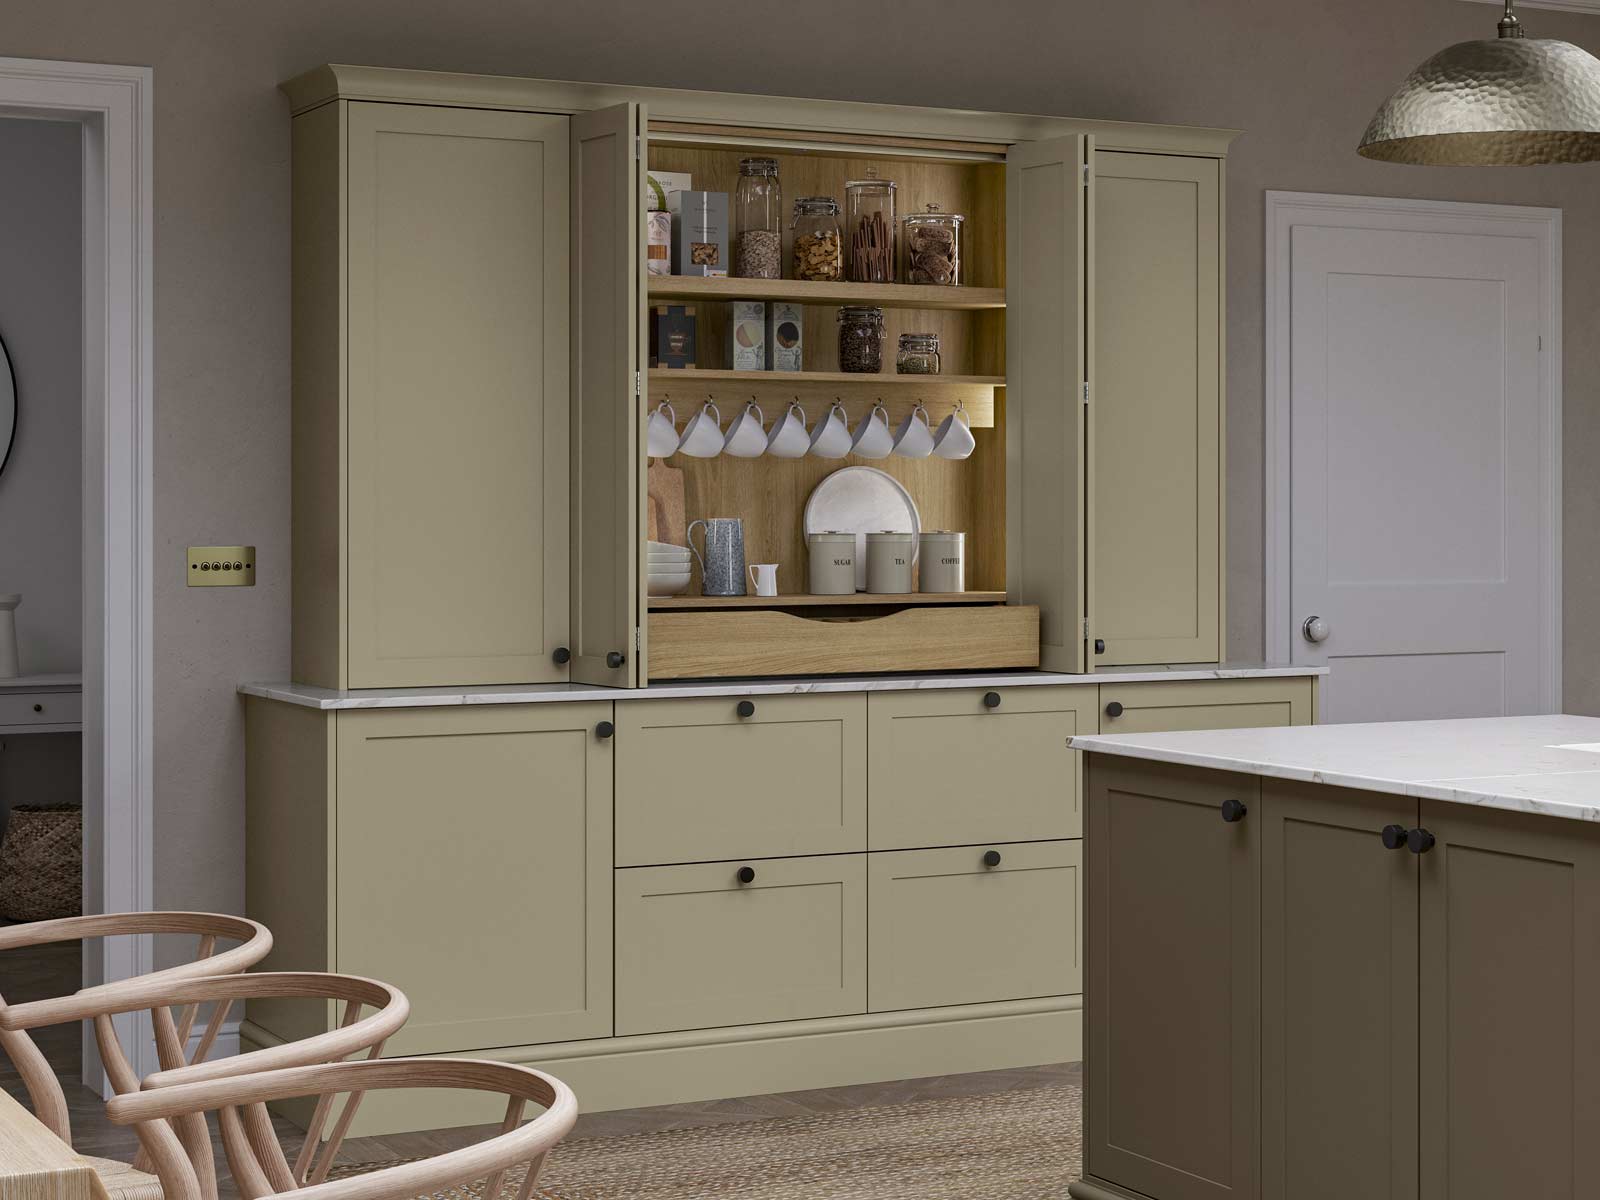 A tea and coffee station cum breakfast cupboard in a light wood finish